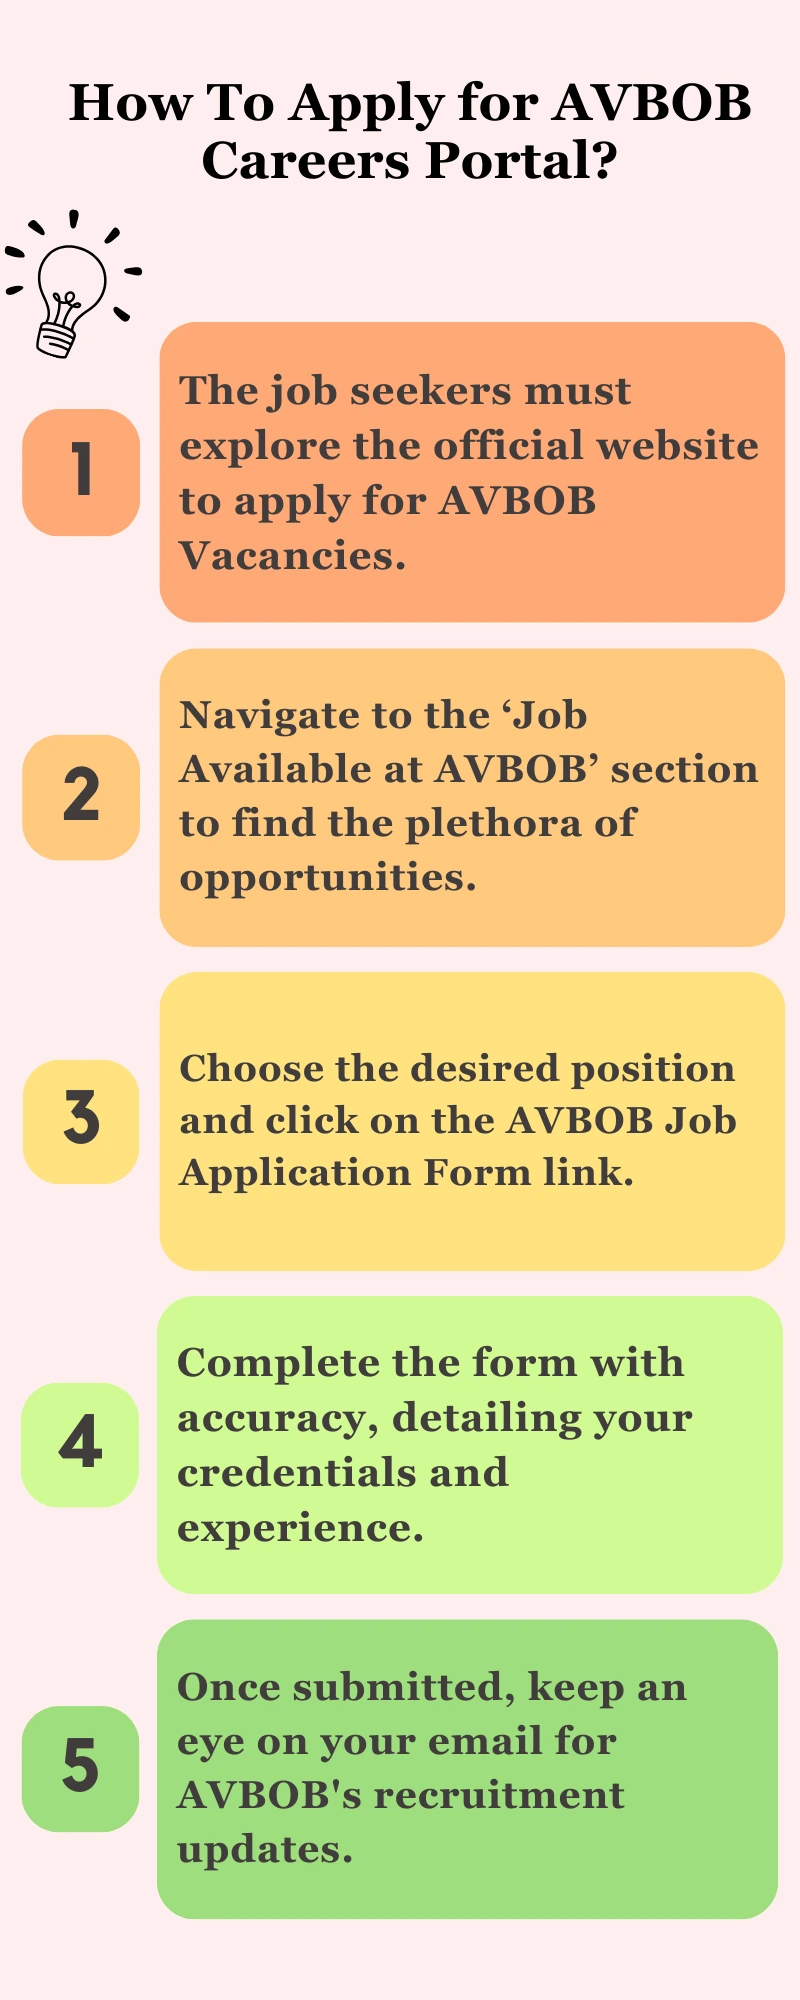 How To Apply for AVBOB Careers Portal?